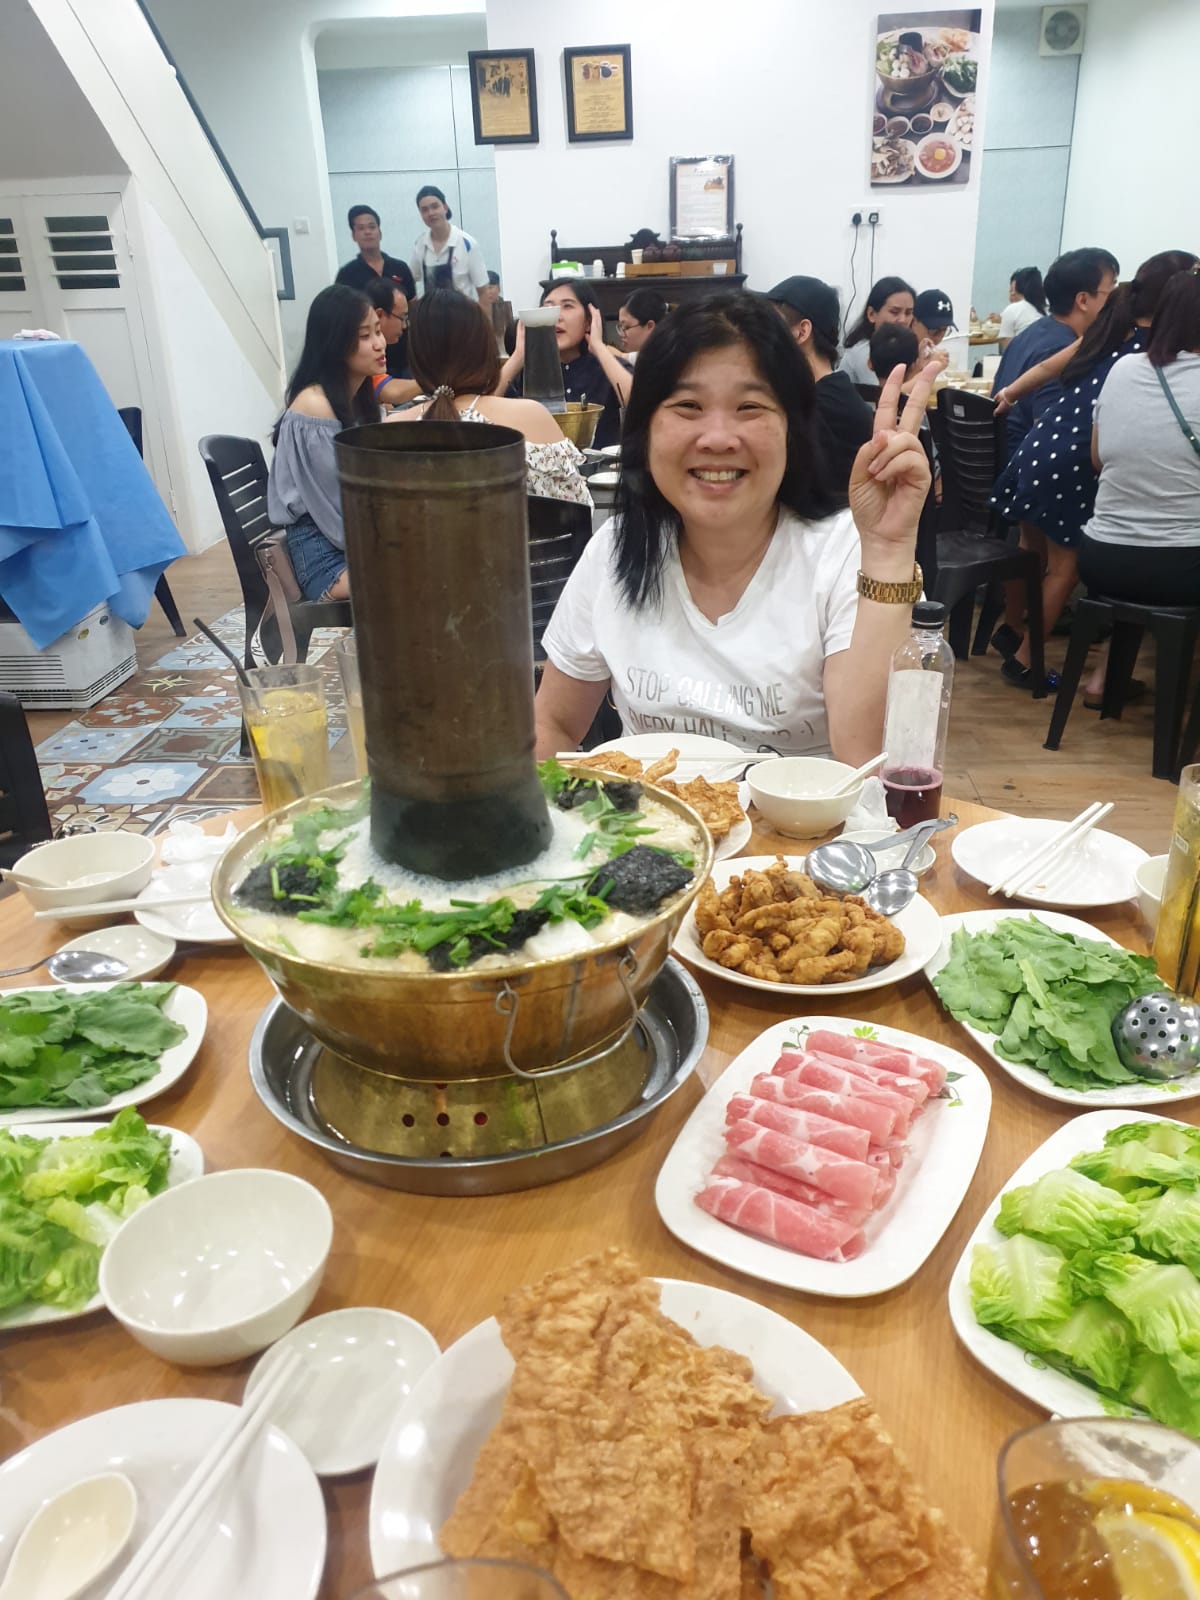 Clawdear: Penang Food Tour - Charcoal Steamboat at Chuan Yee